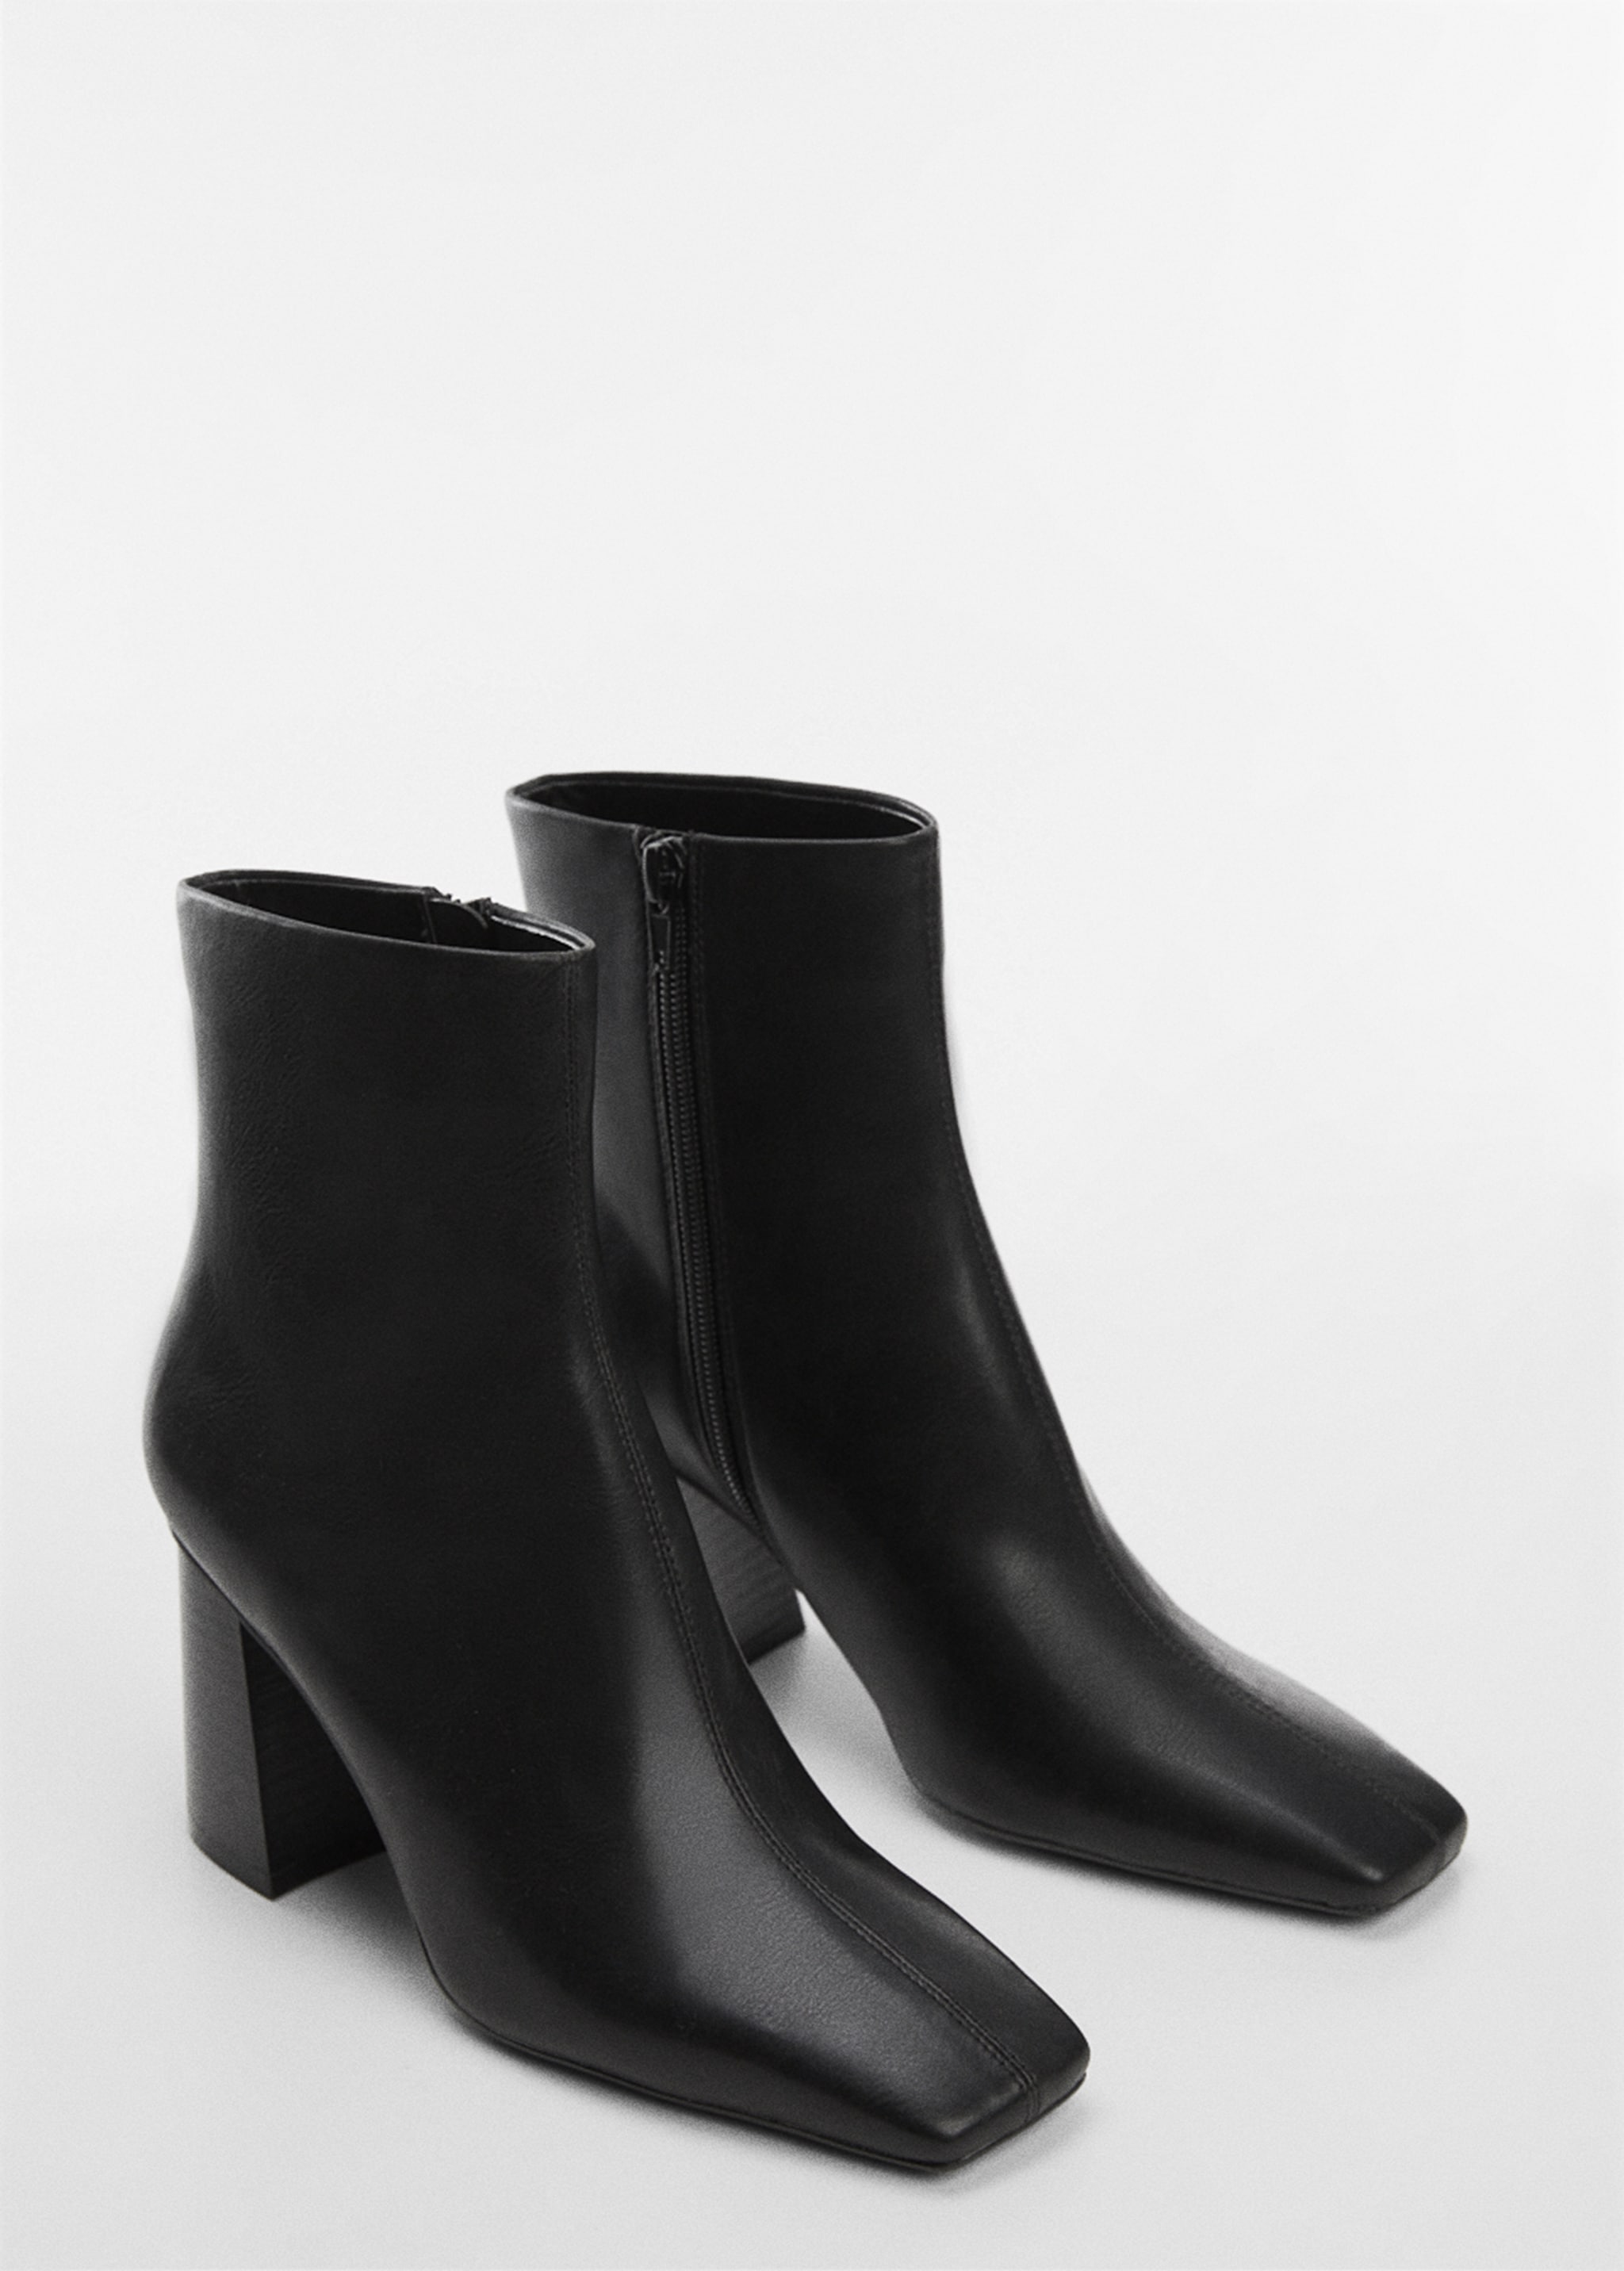 Ankle boots with square toe heel - Medium plane